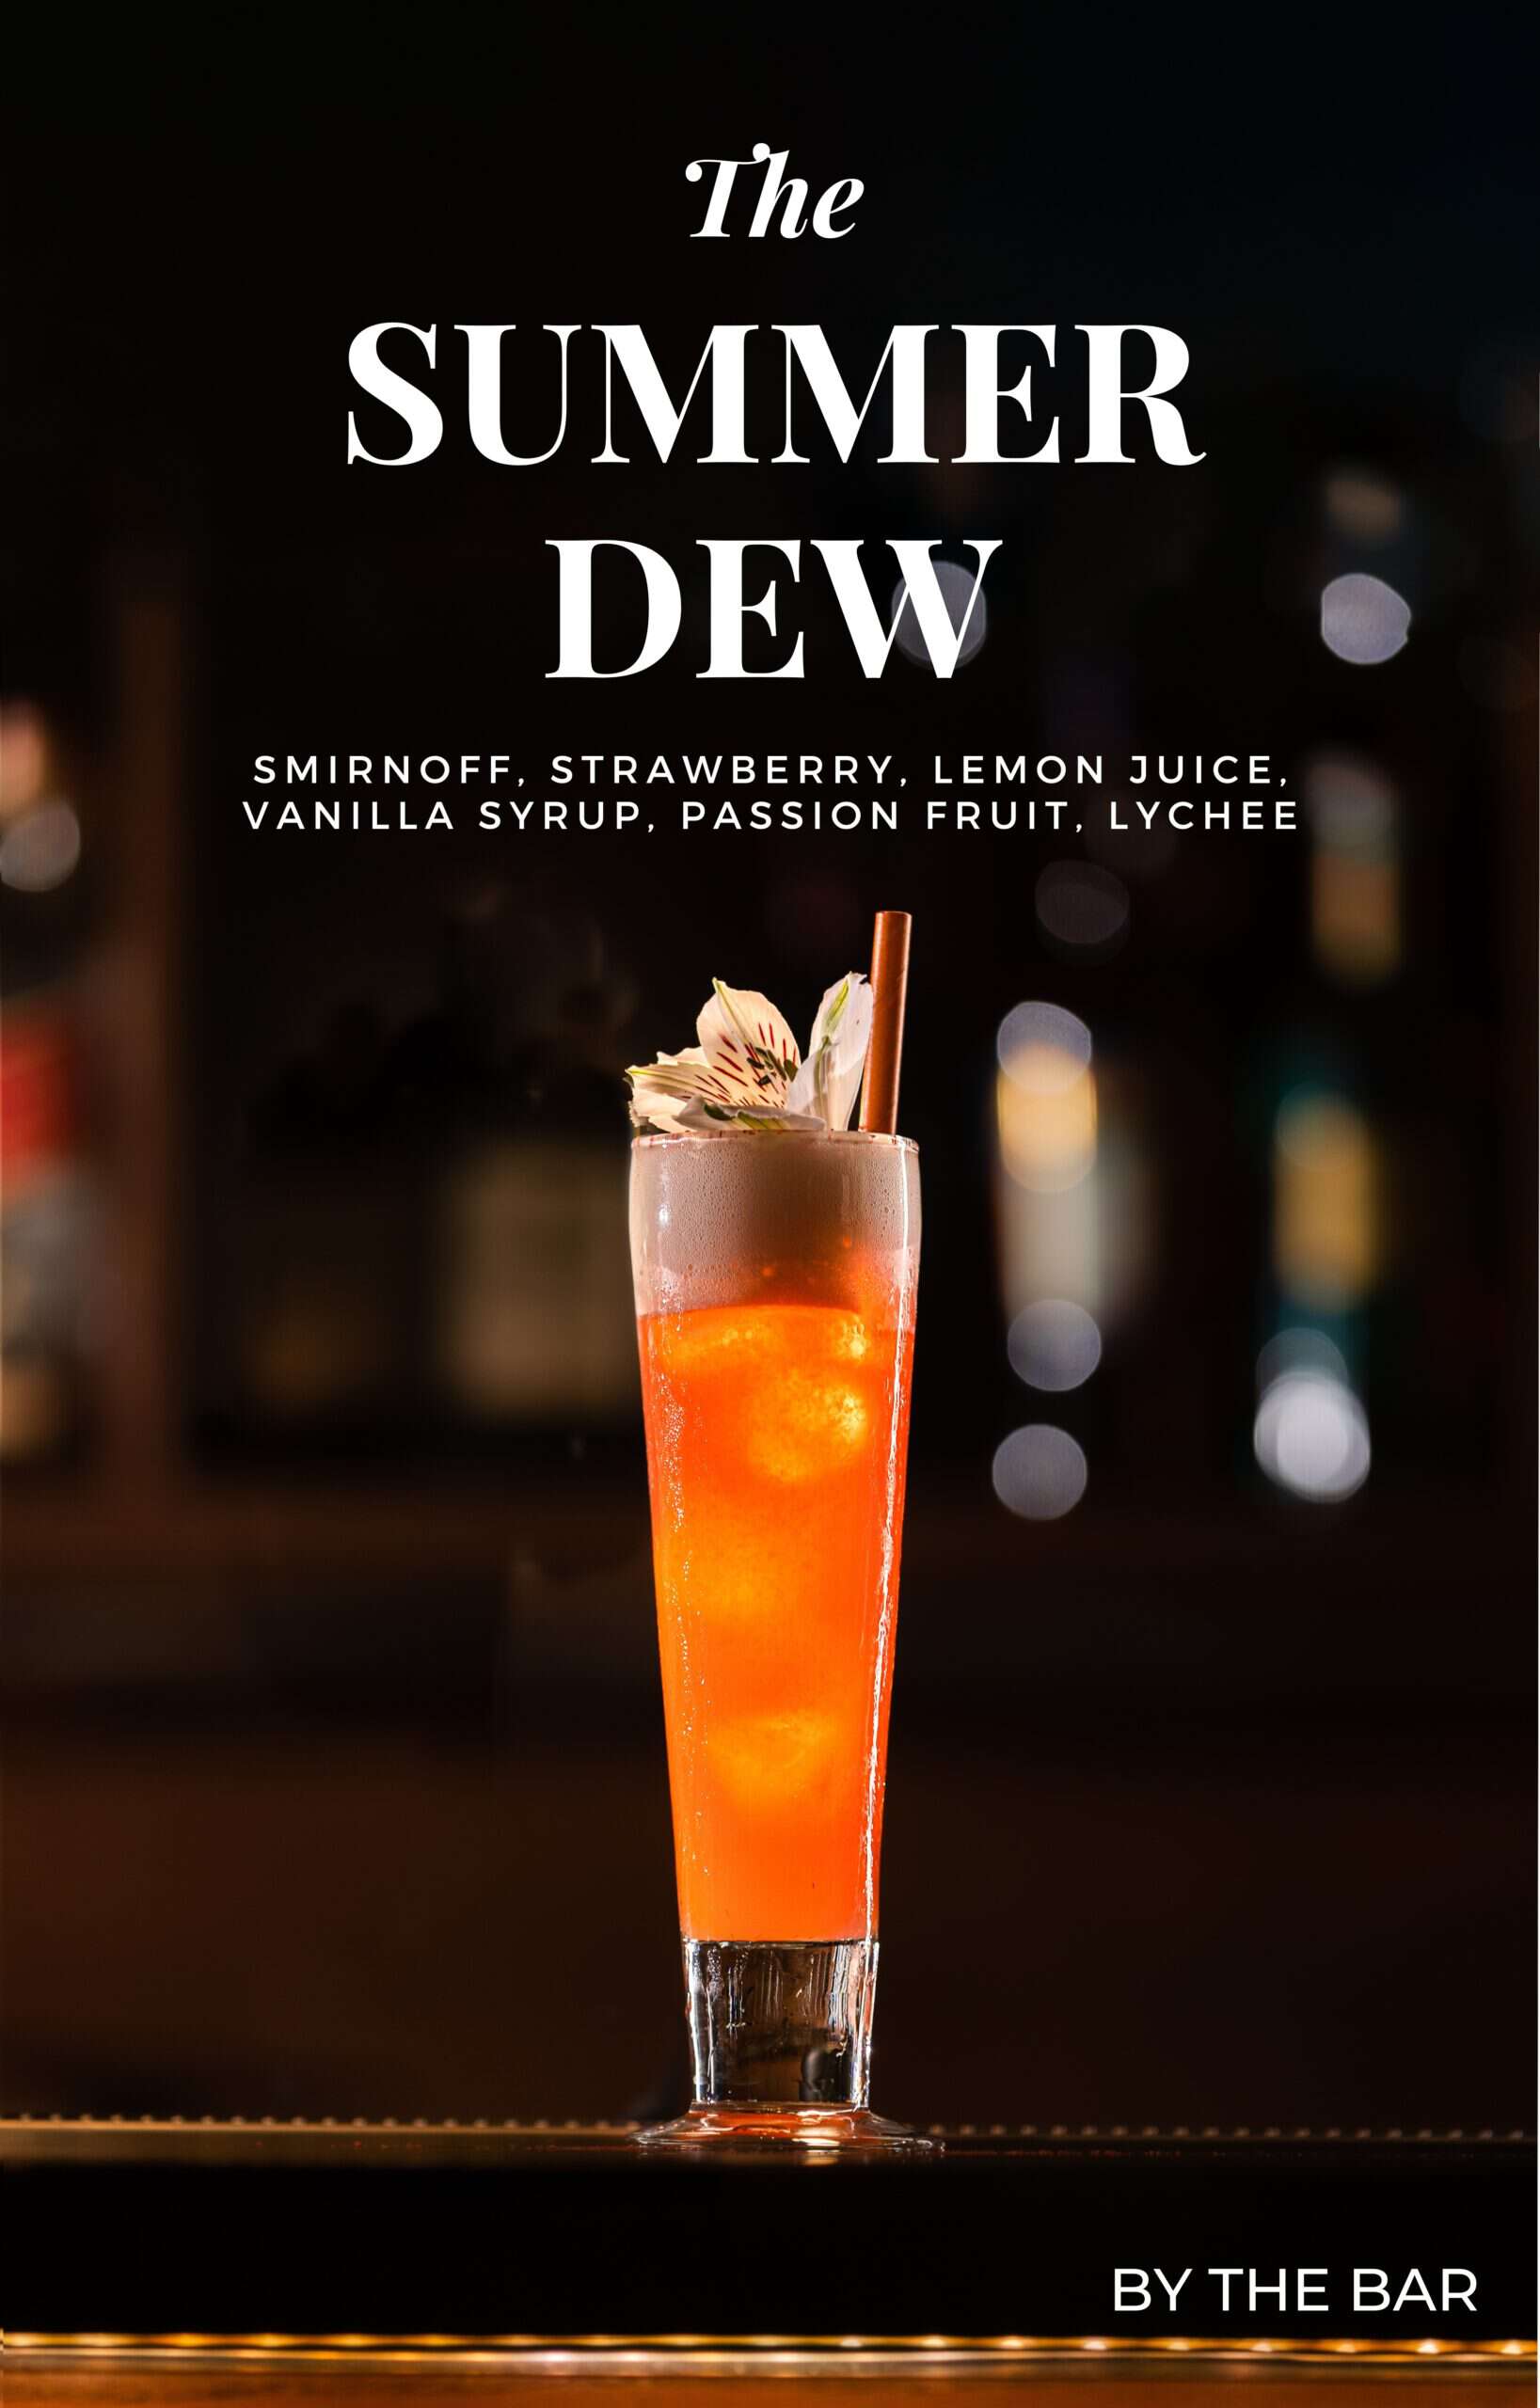 the Summer dew Cocktail